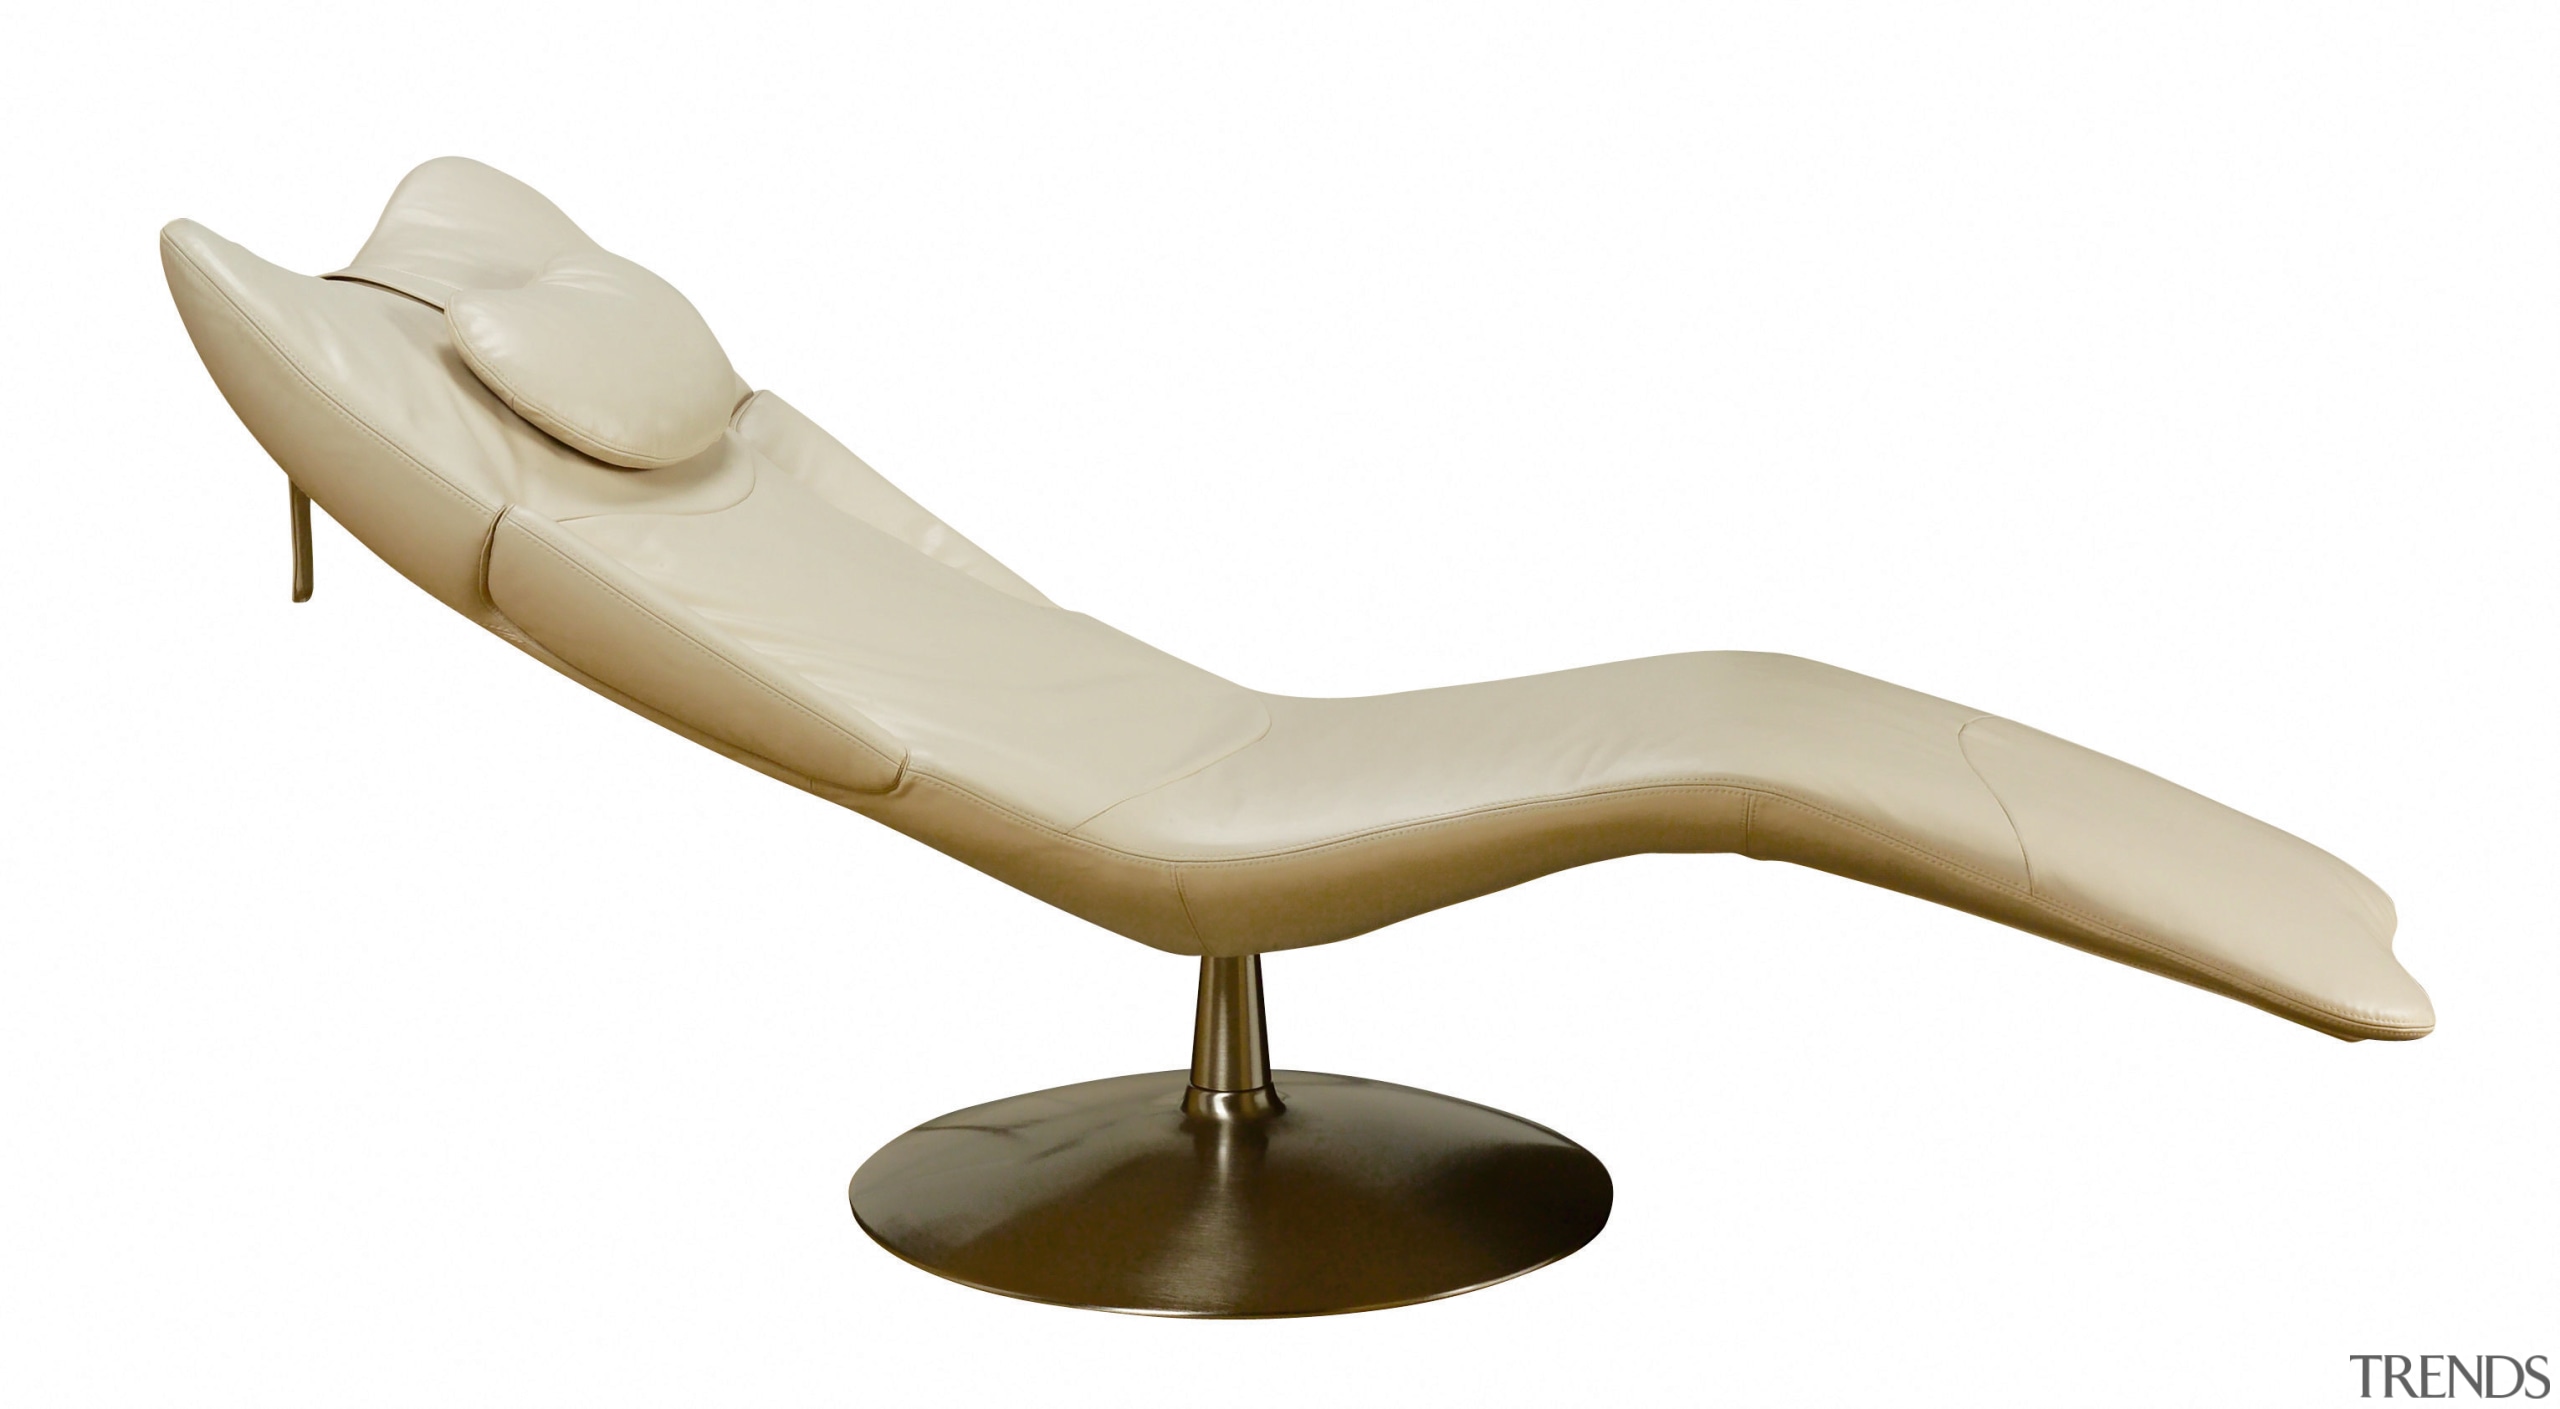 View of a long, curvey, cream leather seat chair, chaise longue, furniture, product design, white